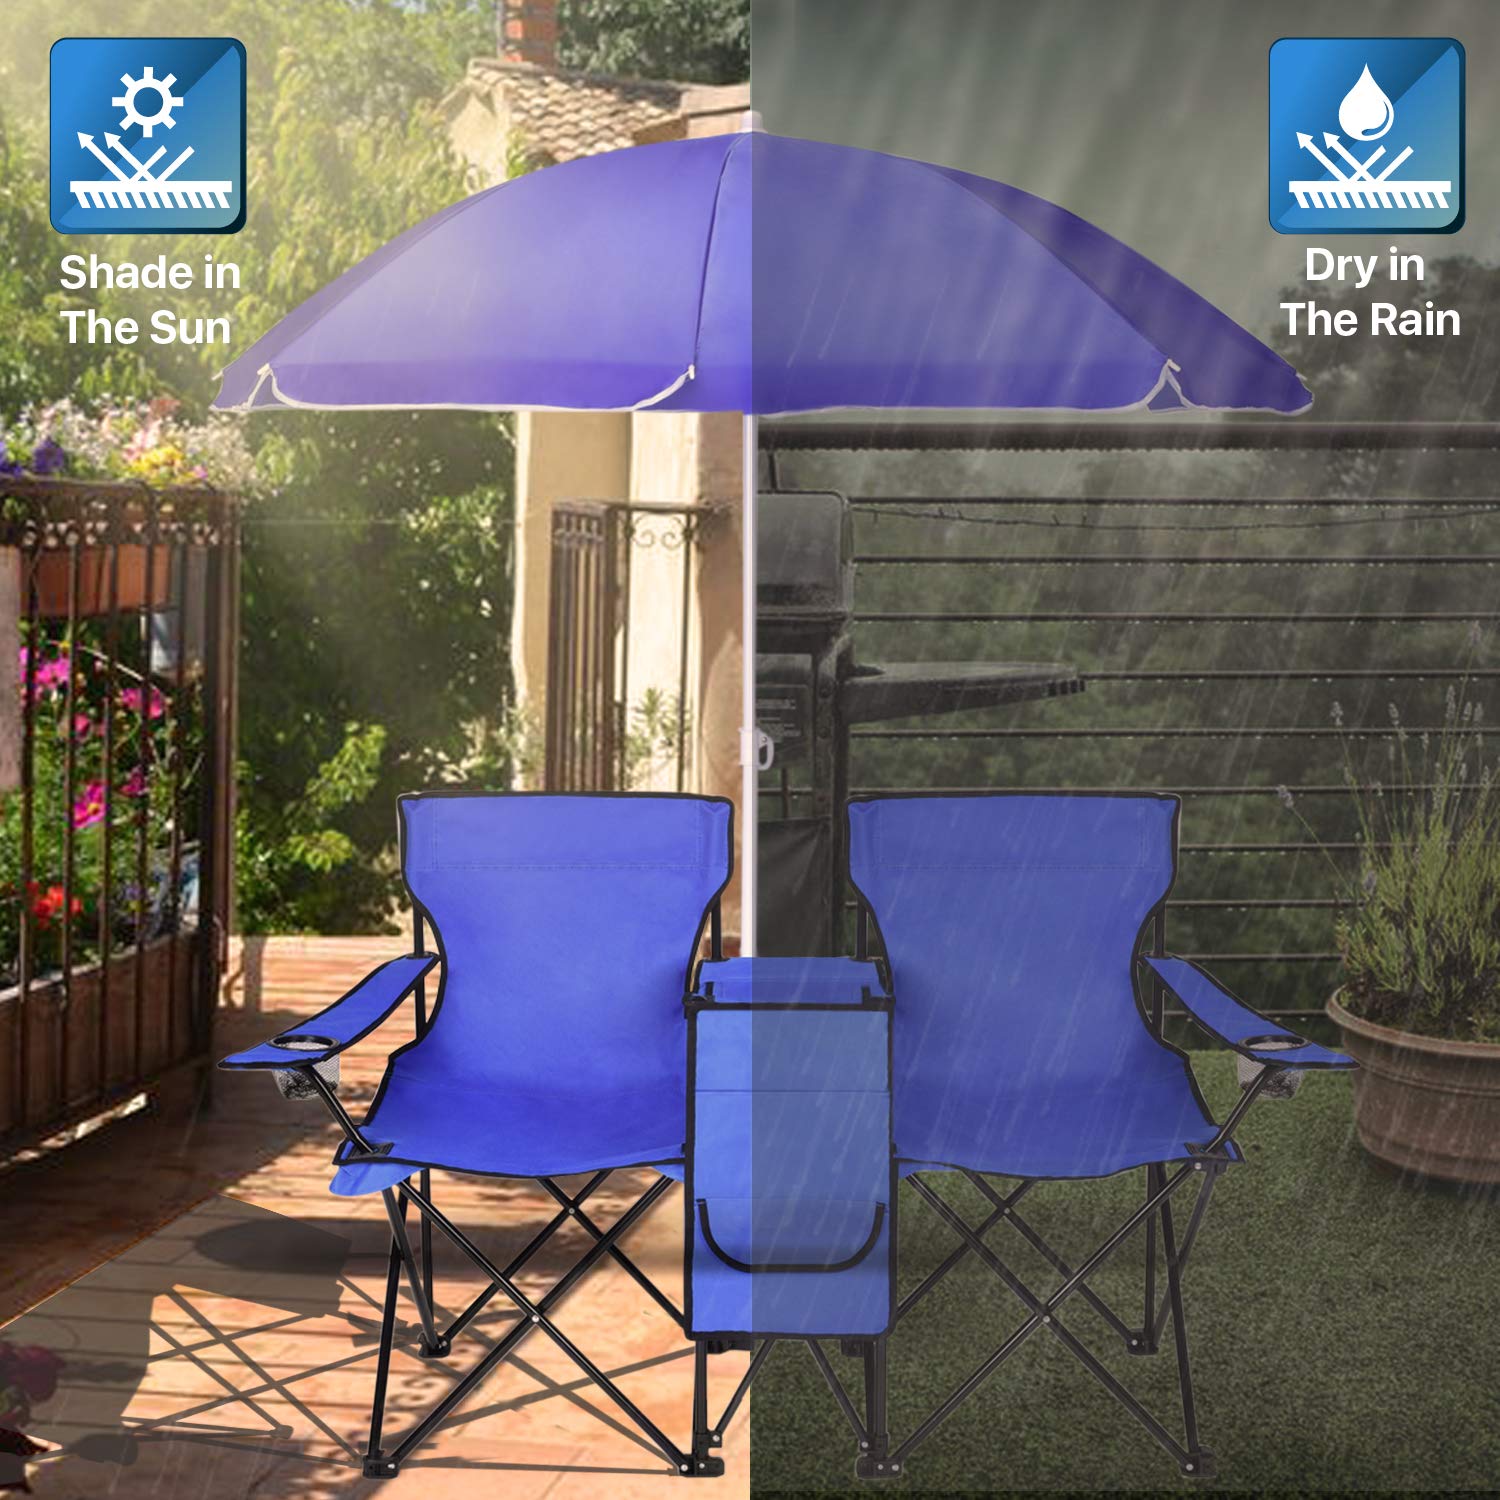 Beach Chair With Canopy, Folding Camping Chairs with Umbrella and Table Cooler, Portable Double-Chair with Beverage Holder for Beach, Camping, Picnic, Patio, Pool, Park, Outdoor, Blue, I5418 - image 4 of 9